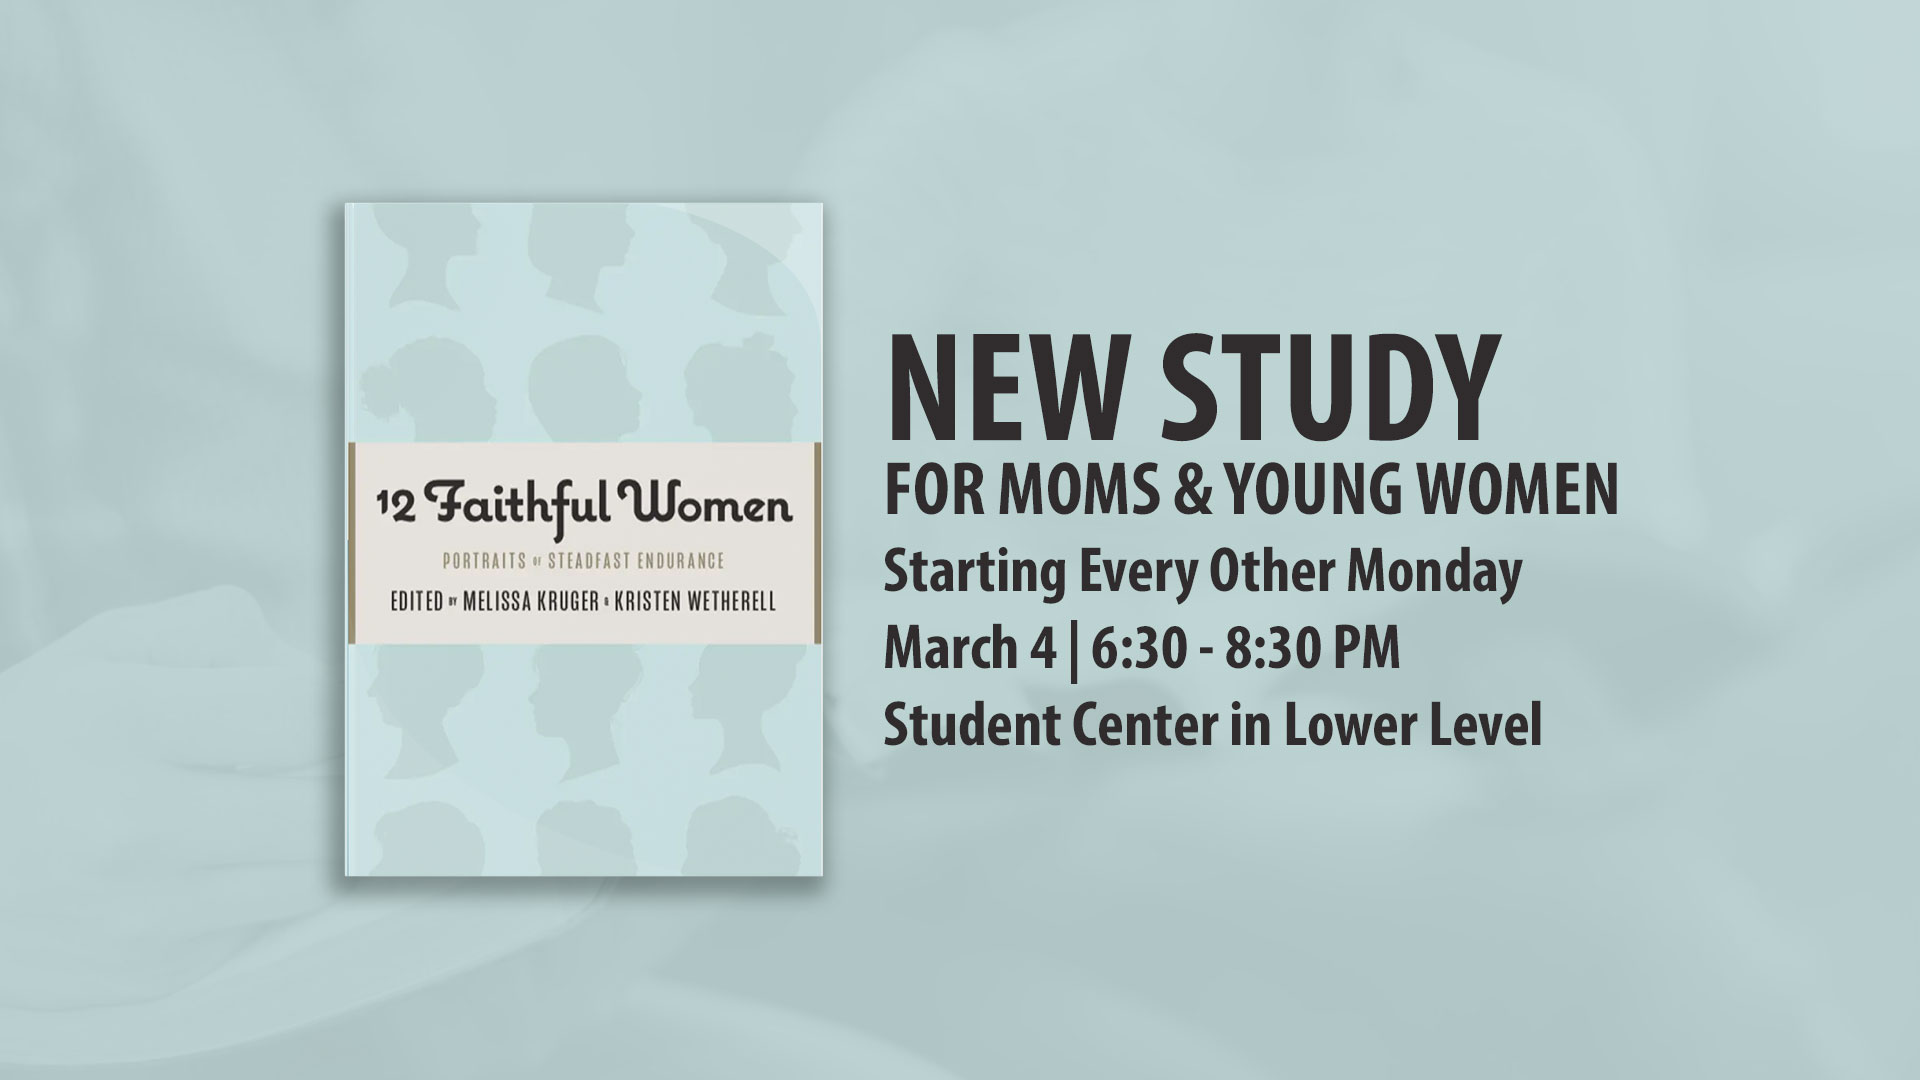 New Study for Moms & Young Women